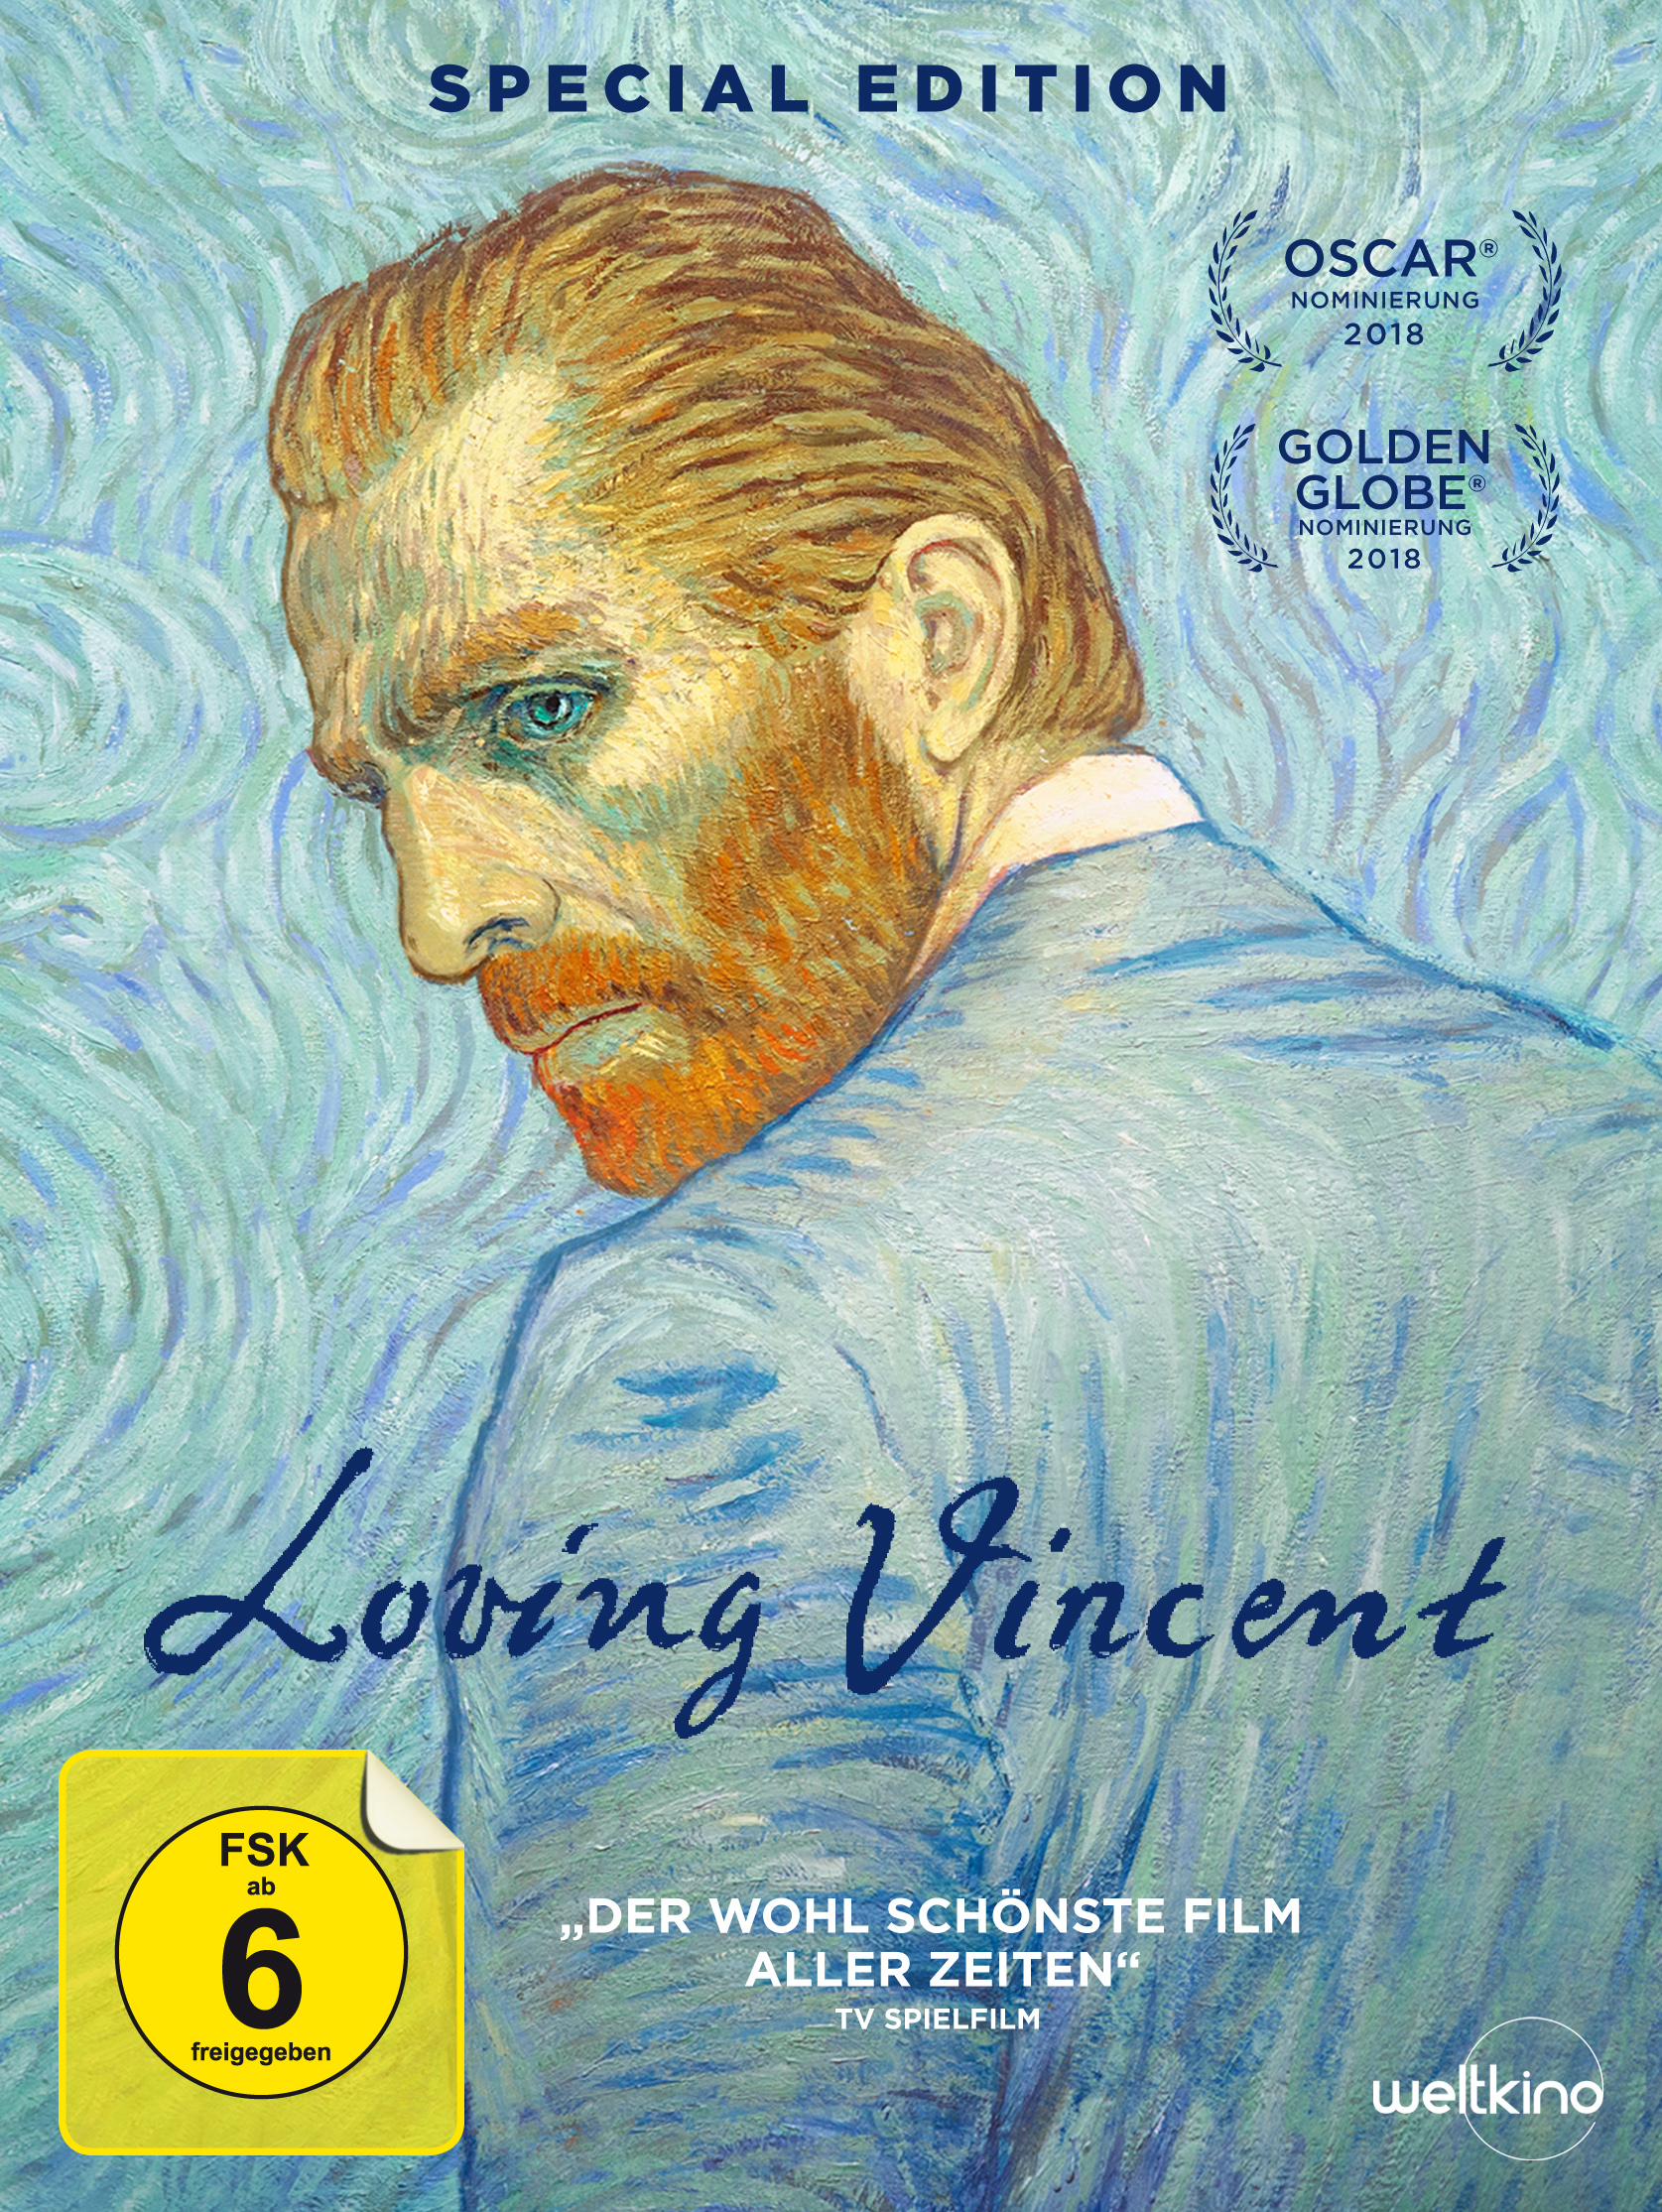 DVD Vincent + Edition) (Limited CD Loving Special